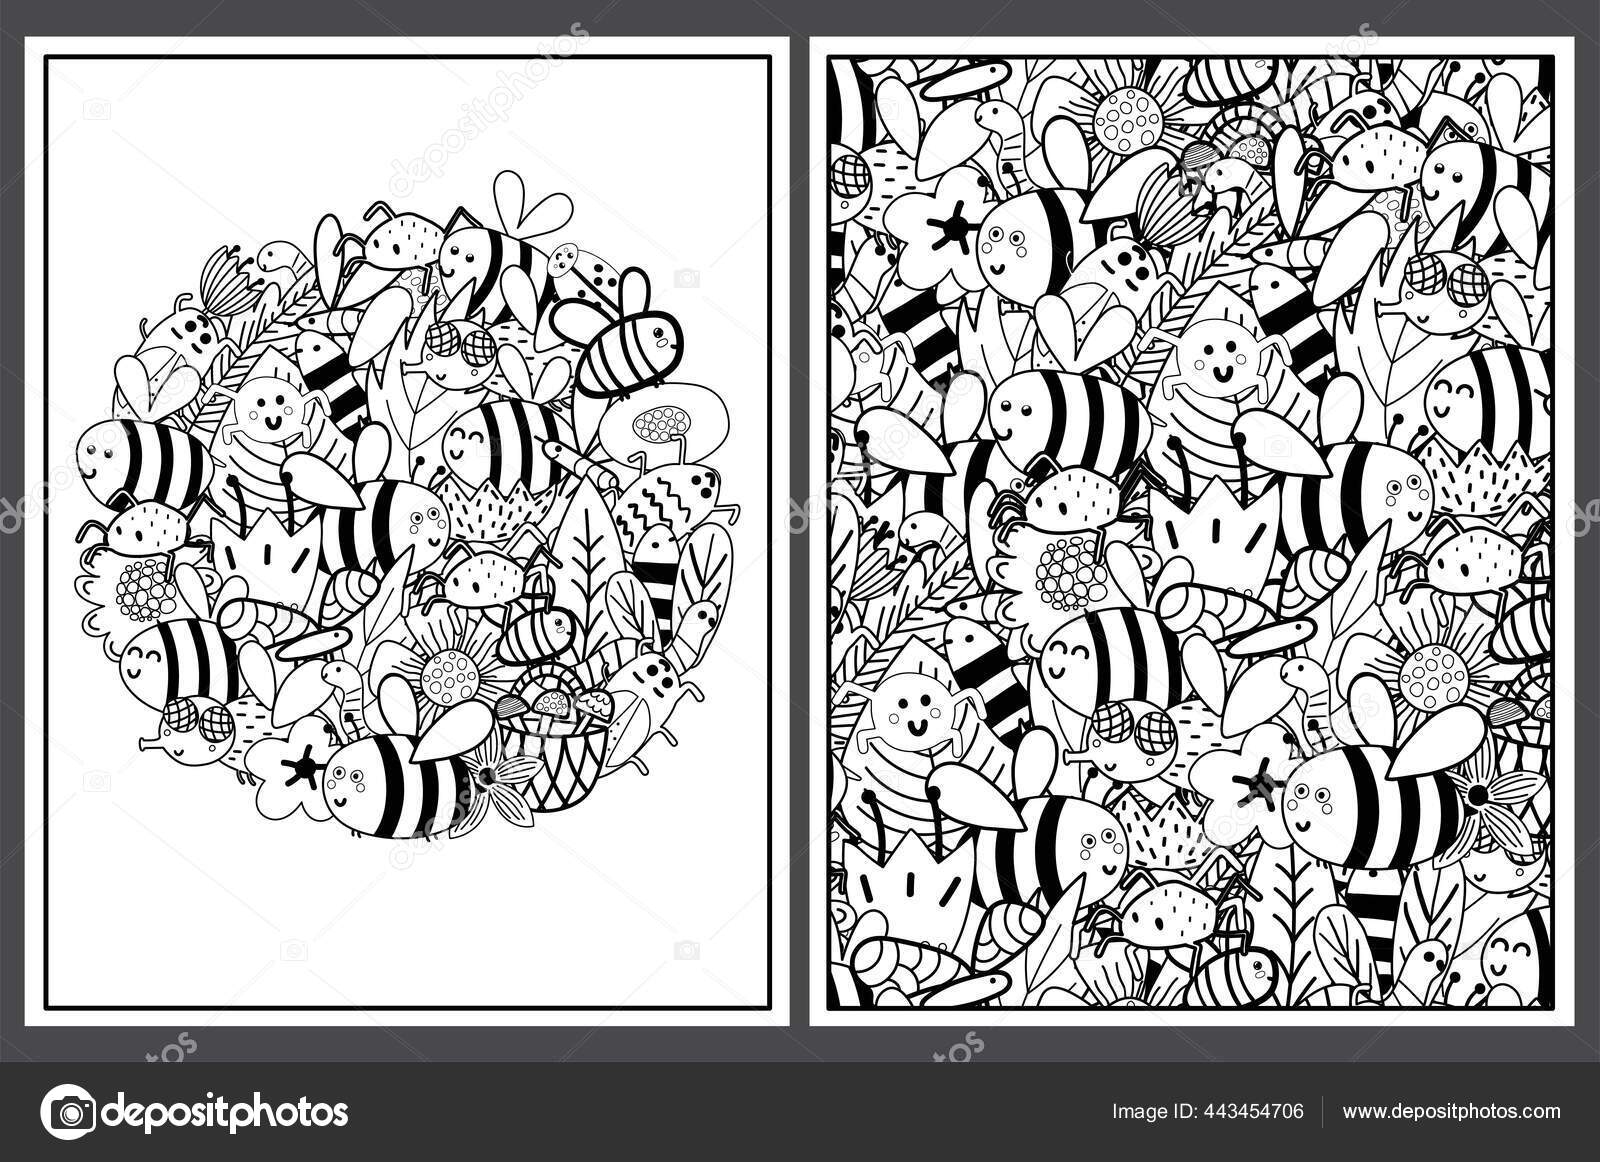 Download Coloring Pages Set With Cute Bees Doodle Insects Templates For Coloring Book Vector Image By C Juliyas Vector Stock 443454706